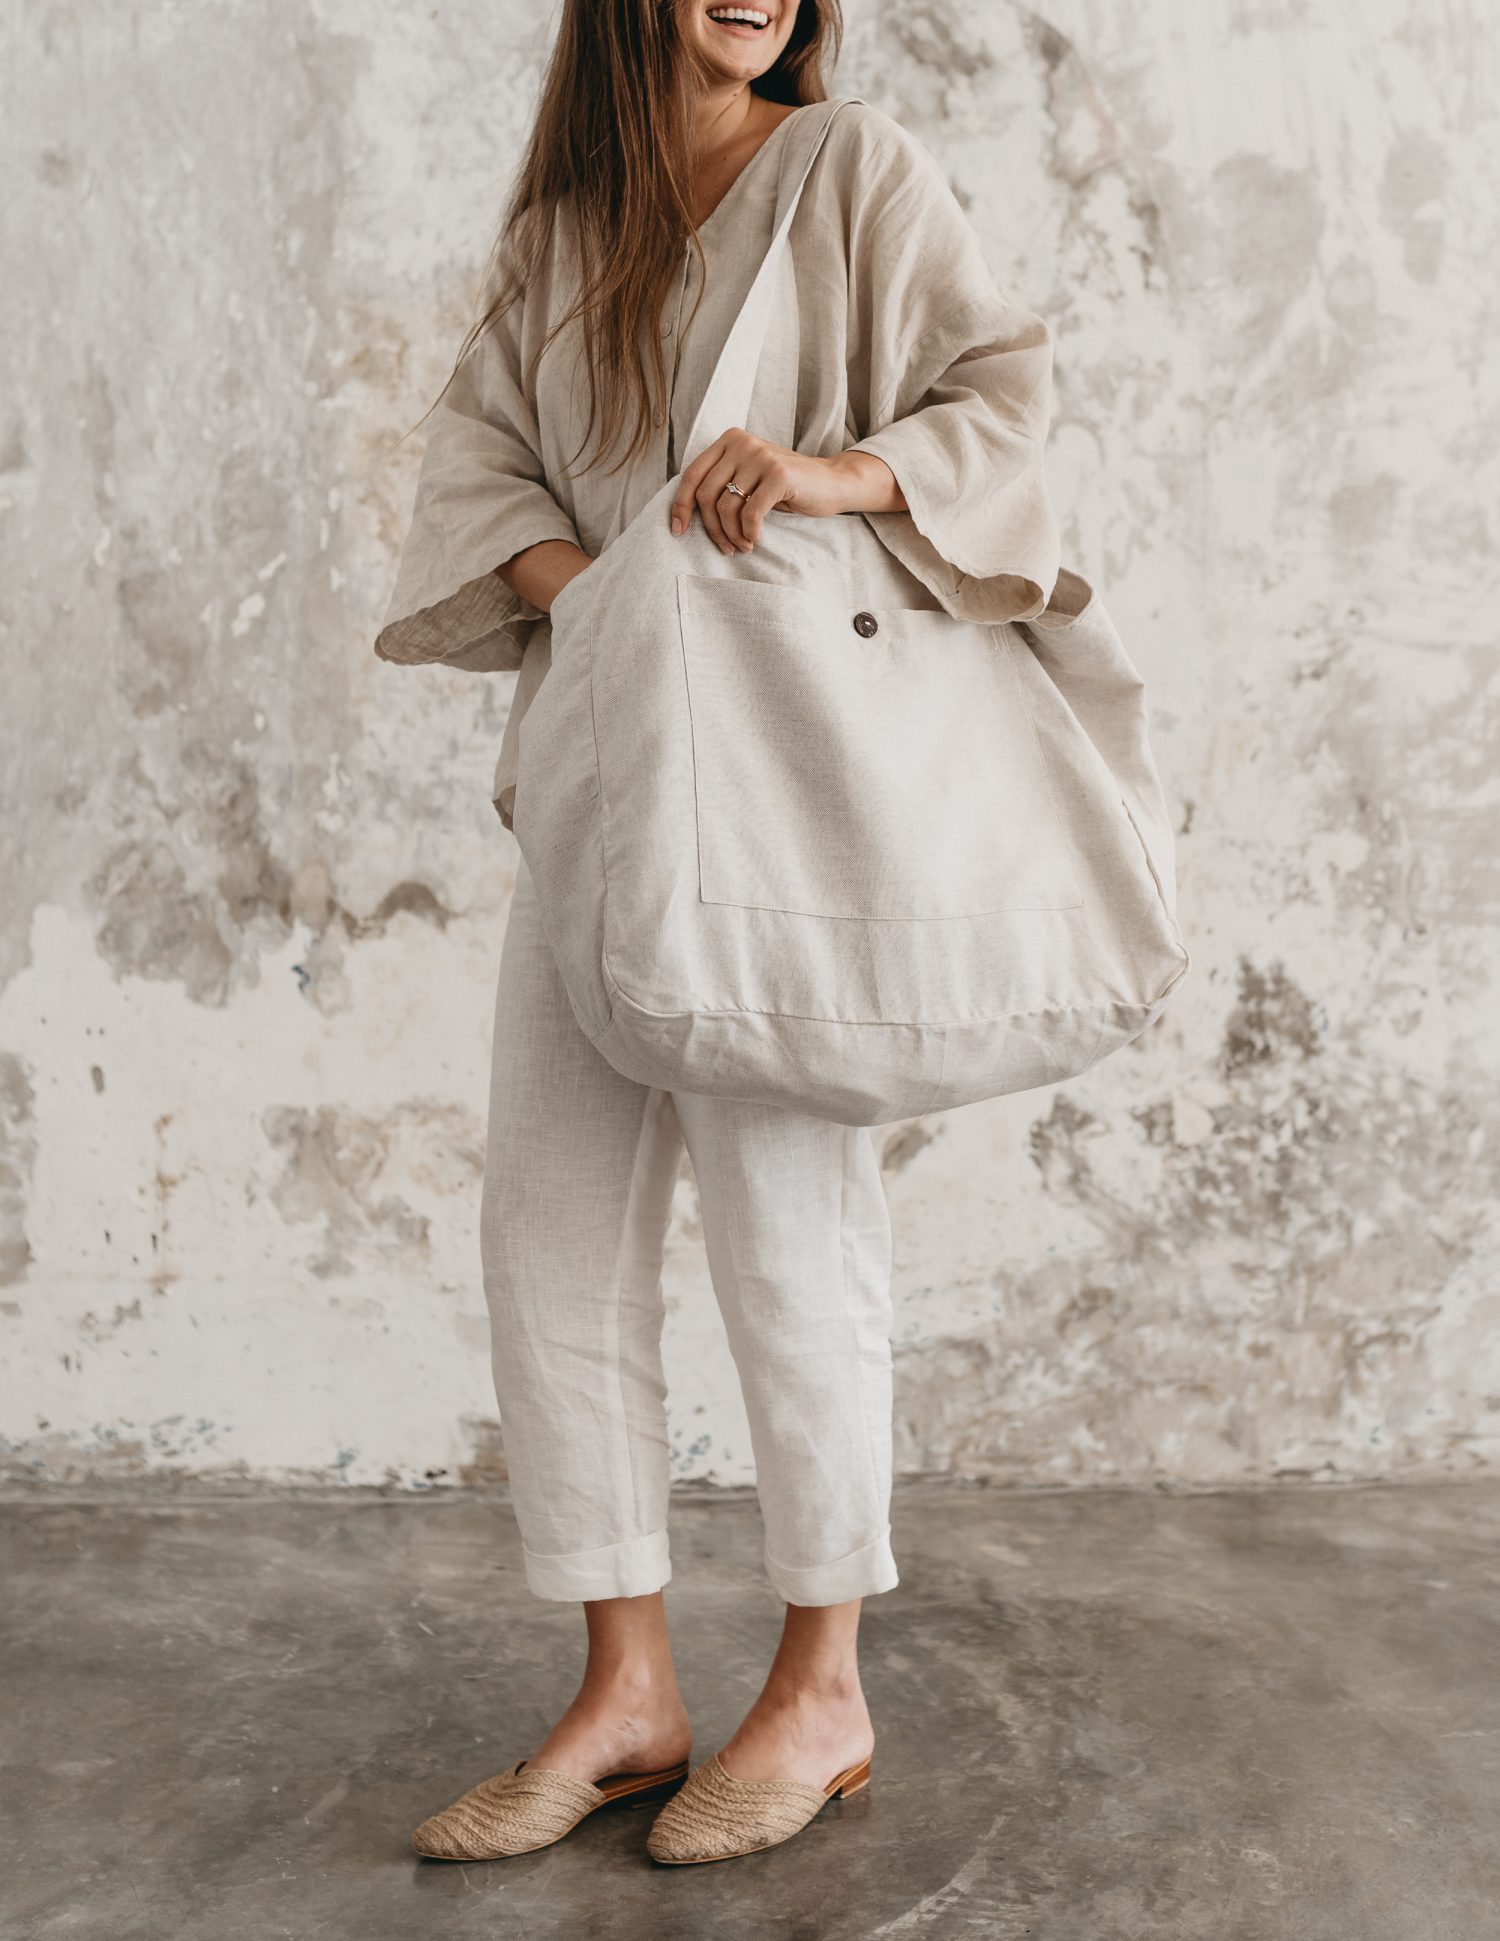 Nowhere & Everywhere Linen Tote Bag Recovered Recycled Redirected Landfill Dead stock Zero Waste Coconut Buttons Ethical Sustainable Australia NZ UK Canada America USA